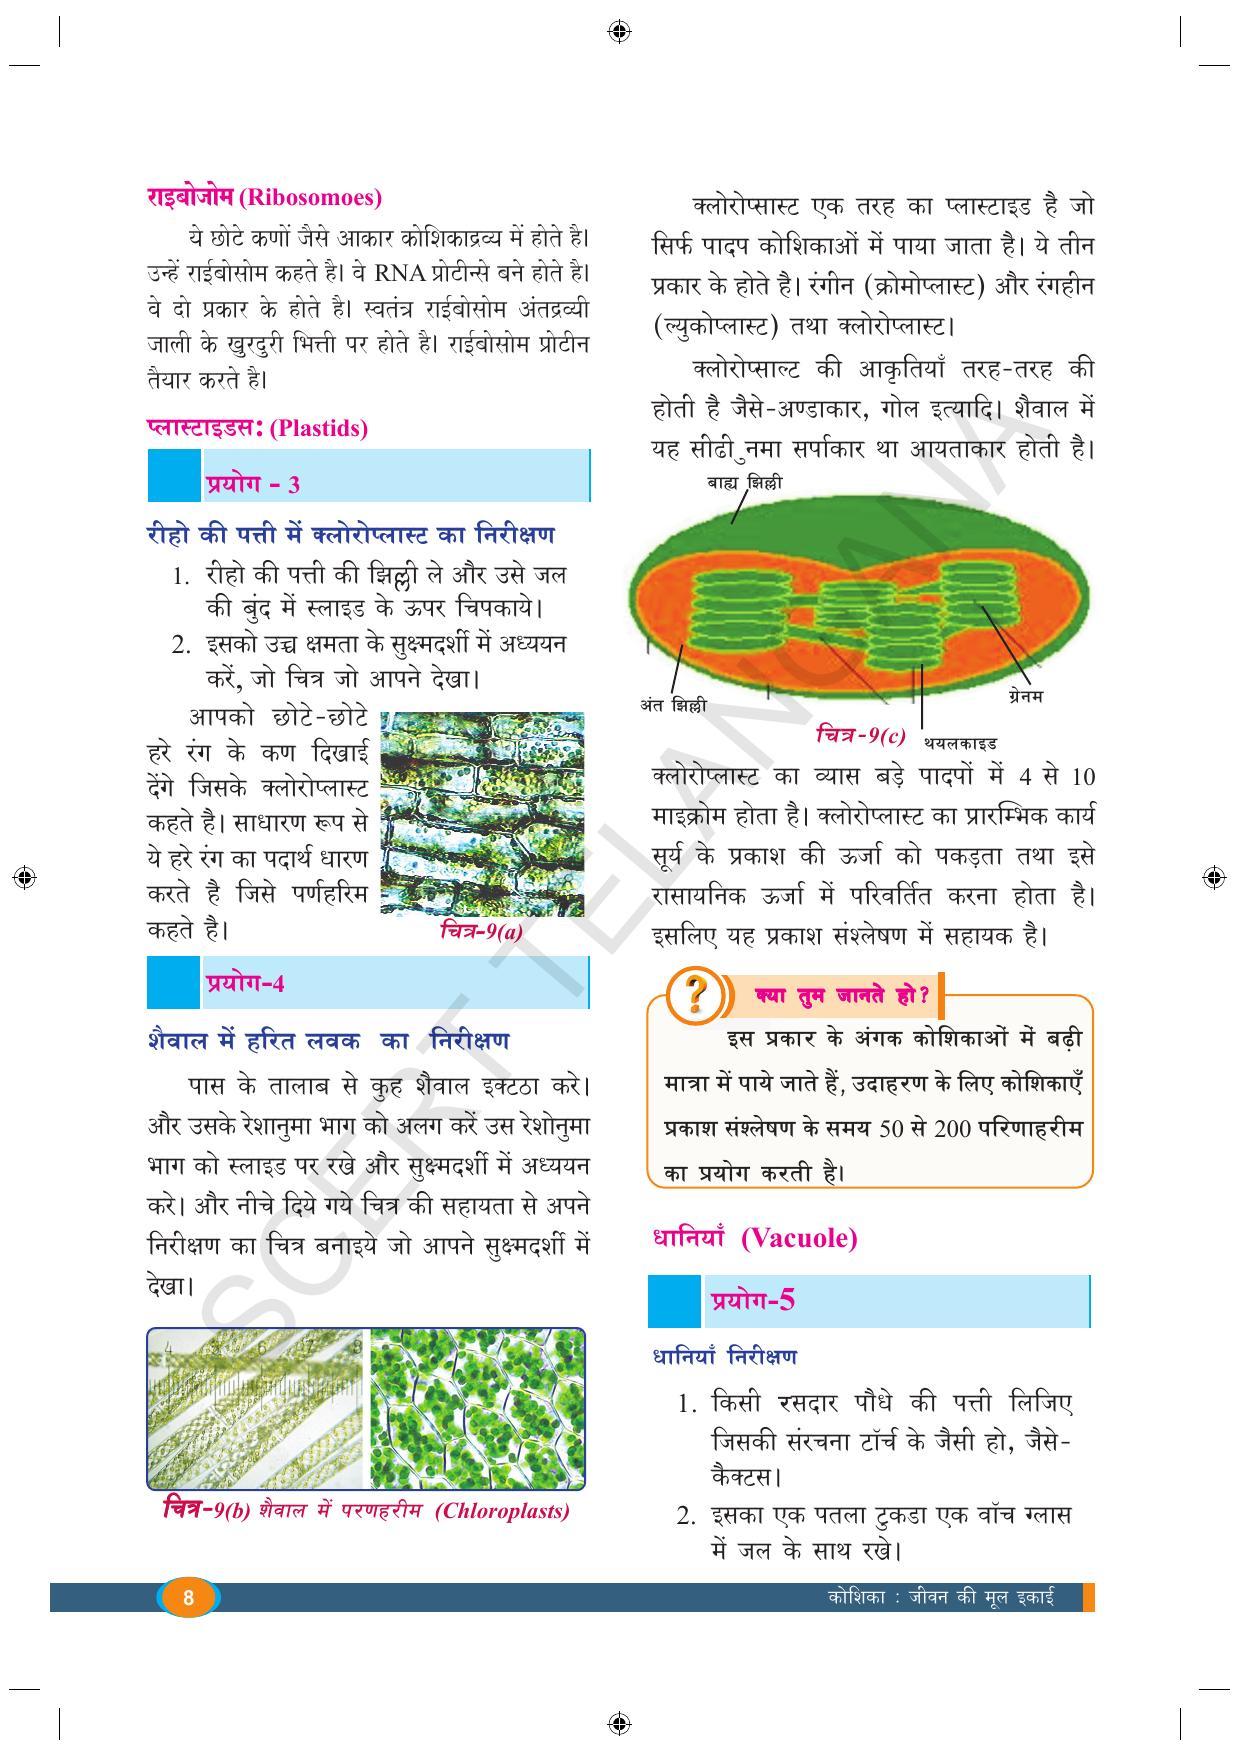 TS SCERT Class 9 Biological Science (Hindi Medium) Text Book - Page 20